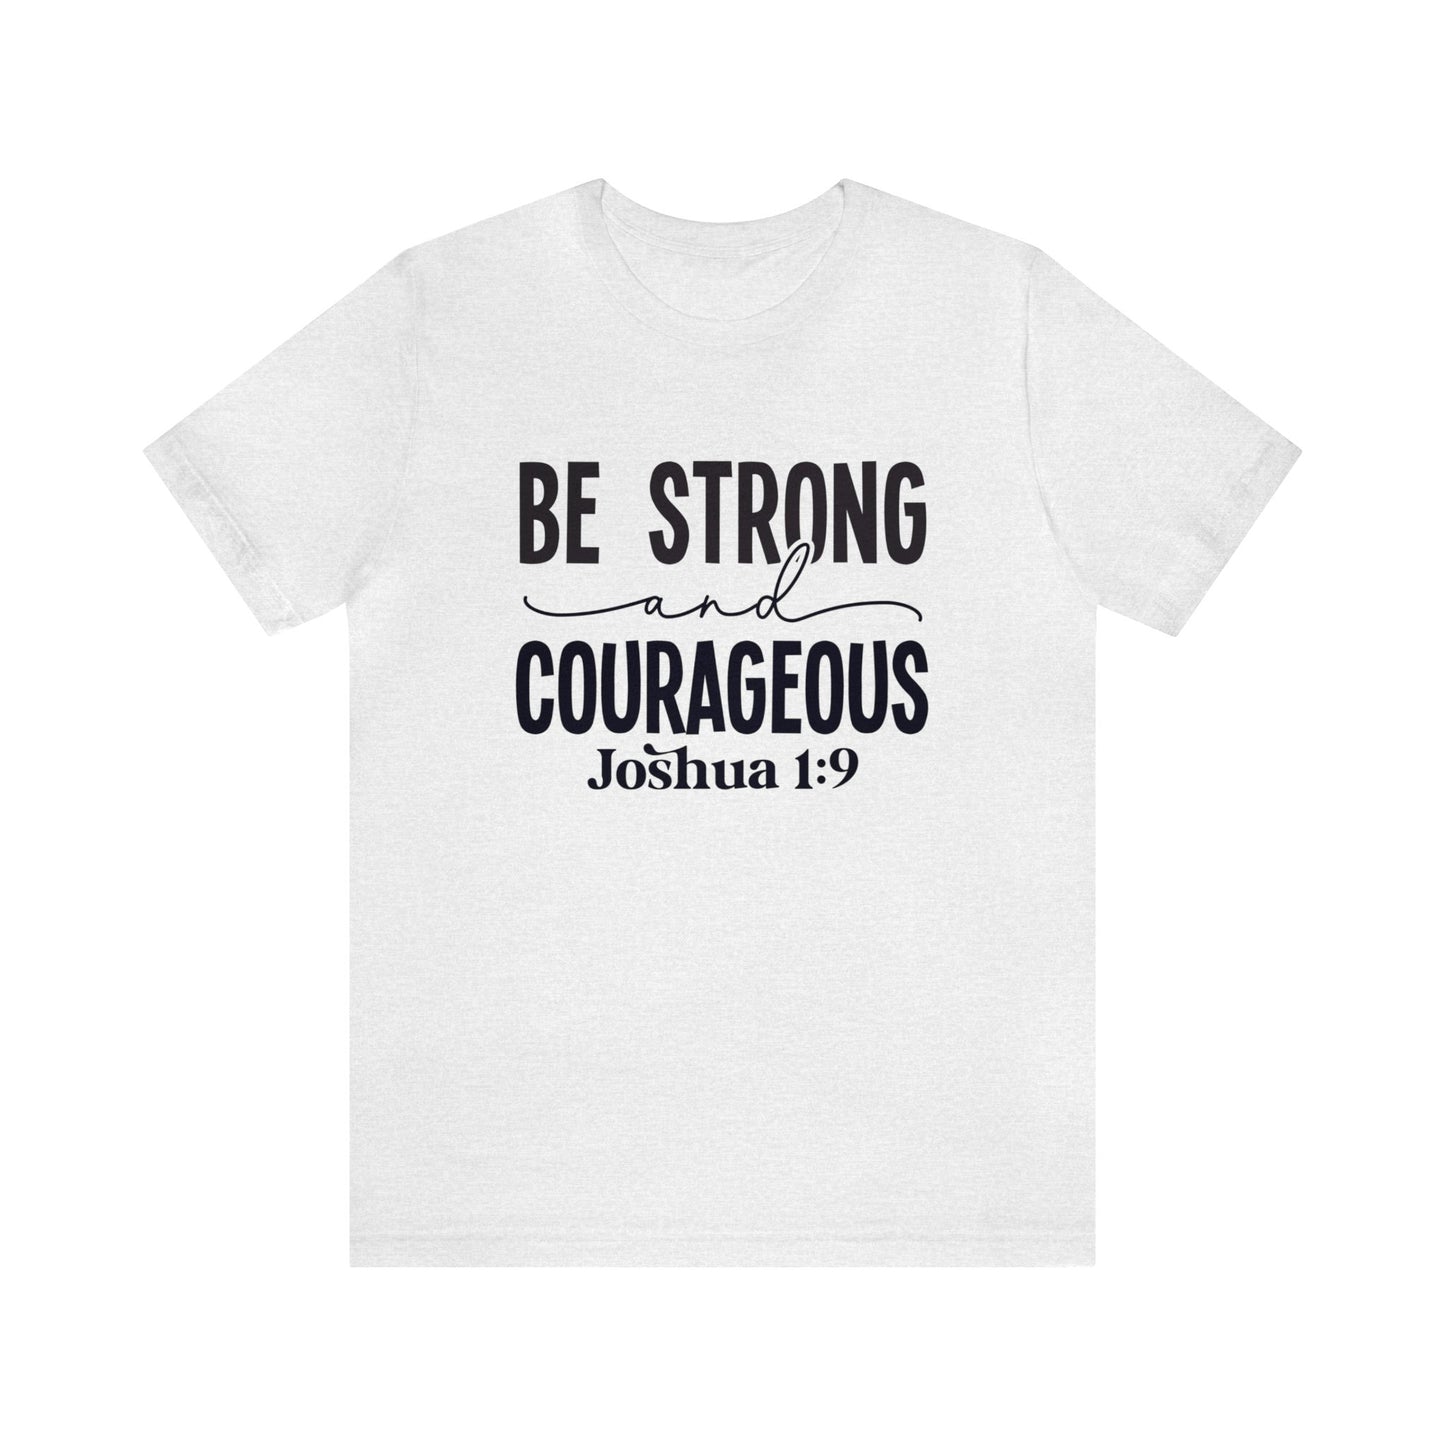 Be Strong and Courageous Women's Short Sleeve Tee